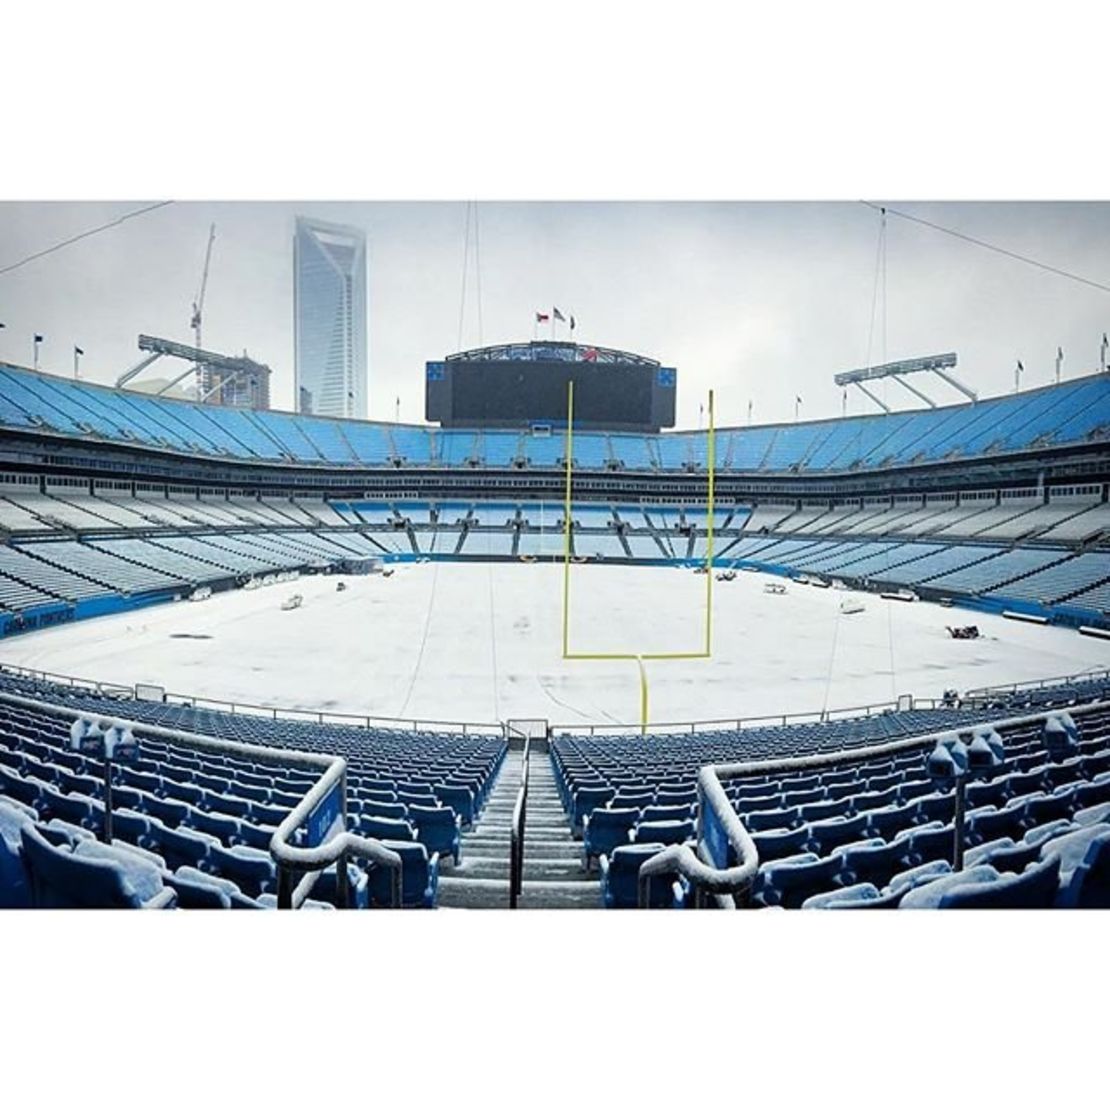 Jason Bastian, the Entertainment Coordinator for the Carolina Panthers,  took this photo of snow in Charlotte's Bank of America Stadium.